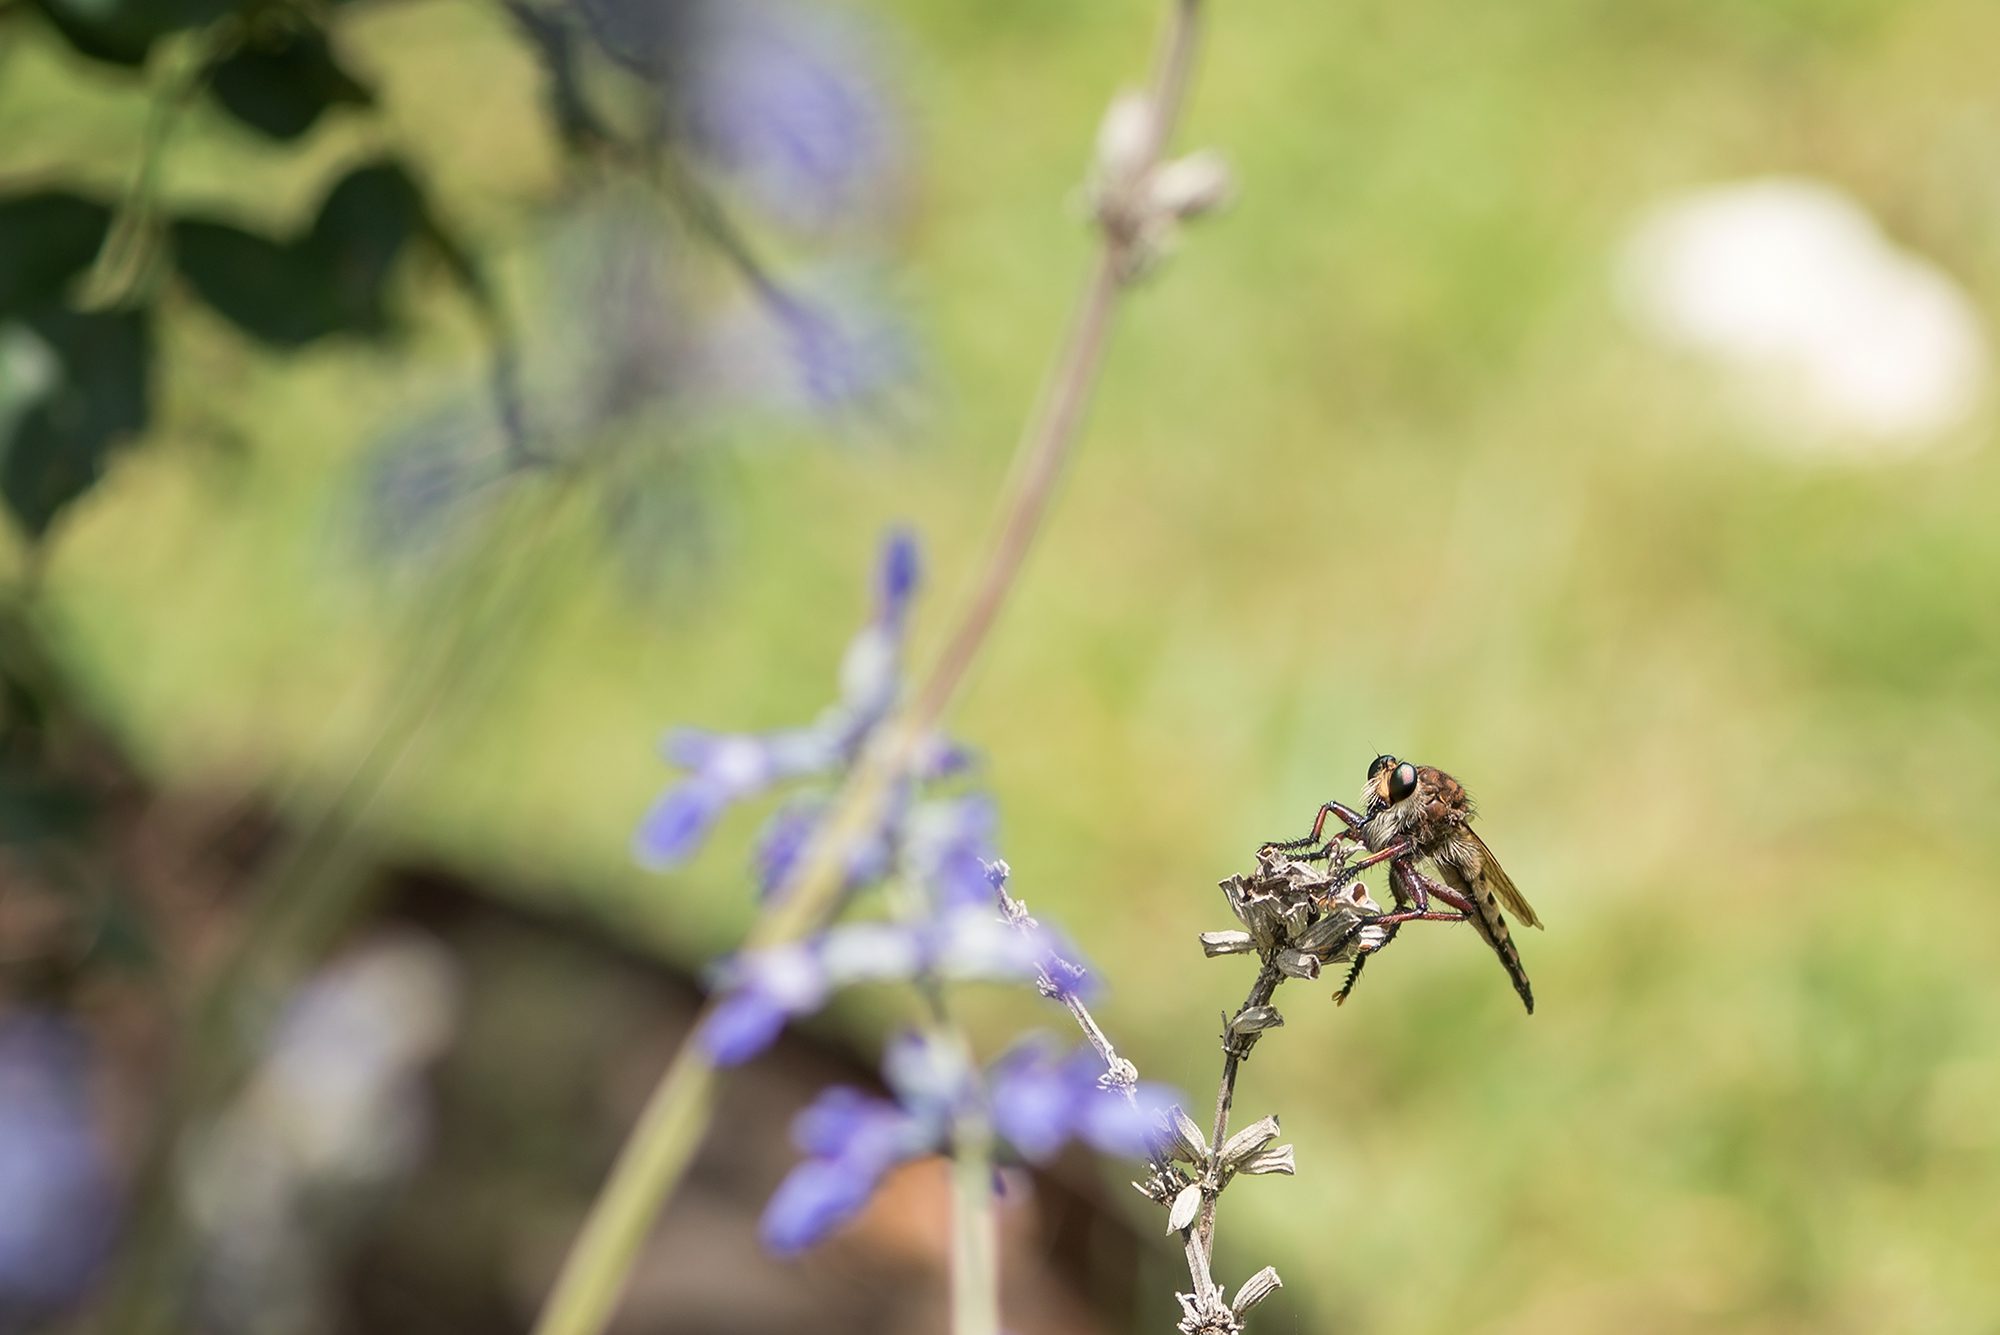 New Braunfels nature macro robber fly photographer